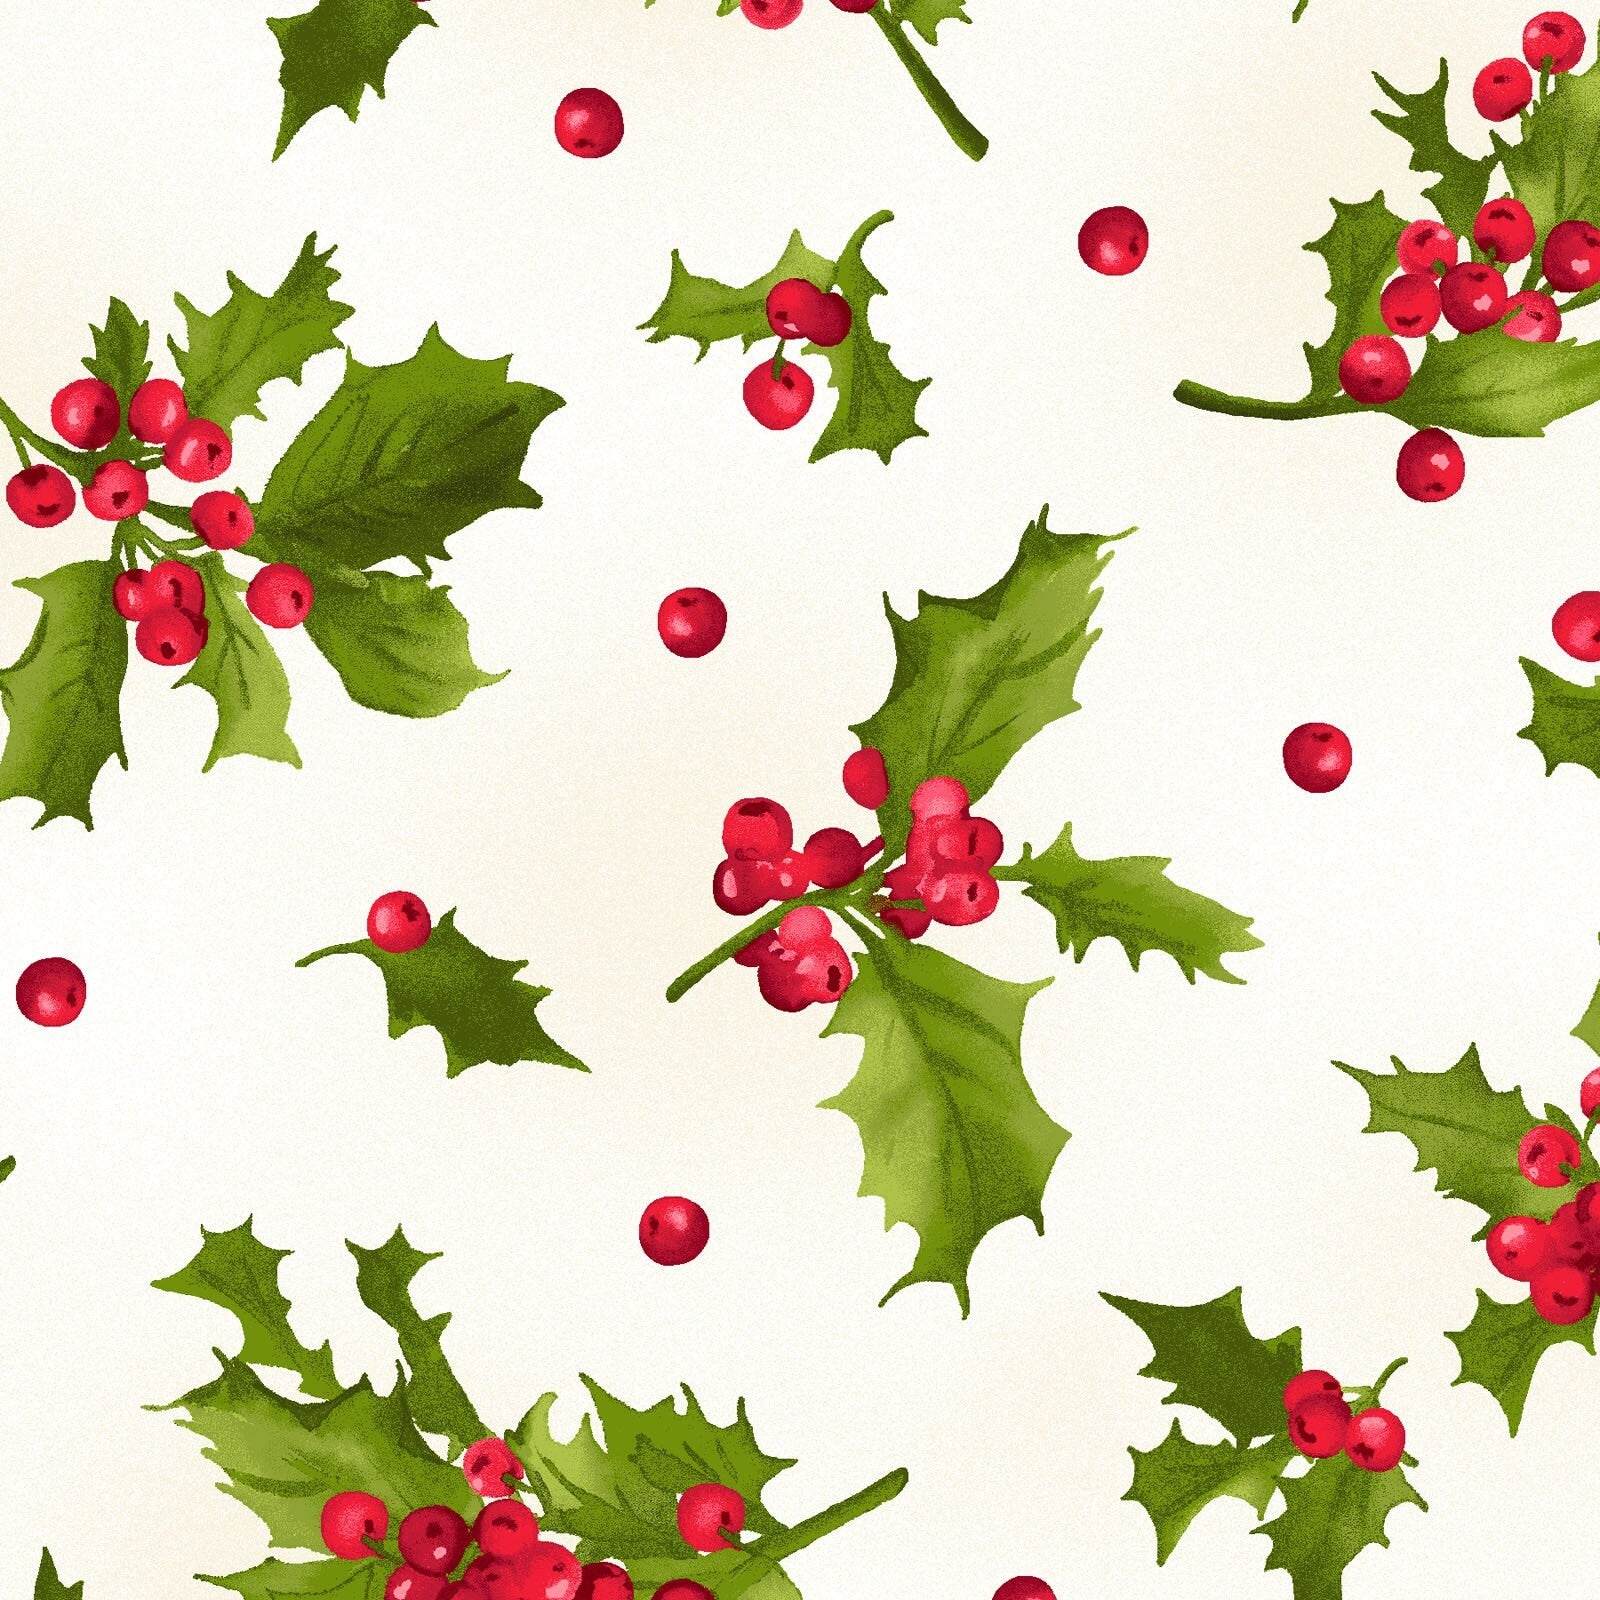 REMNANT 1 Yard 14" of Poinsettia and Pine - Holly and Berries on Cream Fabric, Maywood Studio MAS9123-E, Christmas Holly Fabric